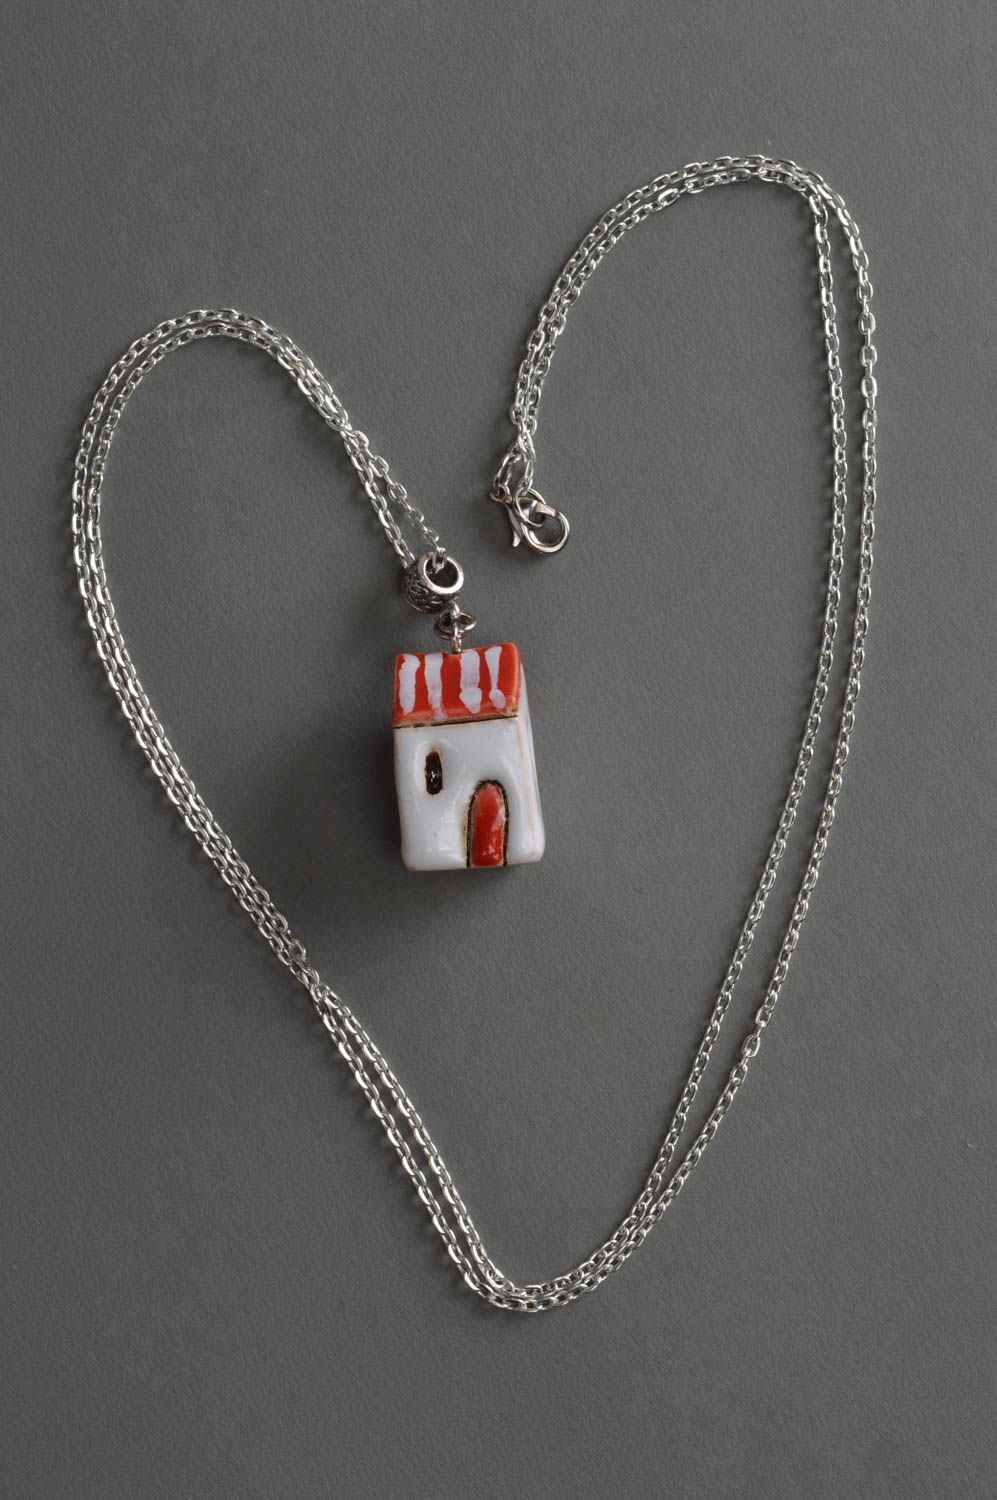 Beautiful handmade designer painted ceramic neck pendant in the shape of house with red roof photo 3